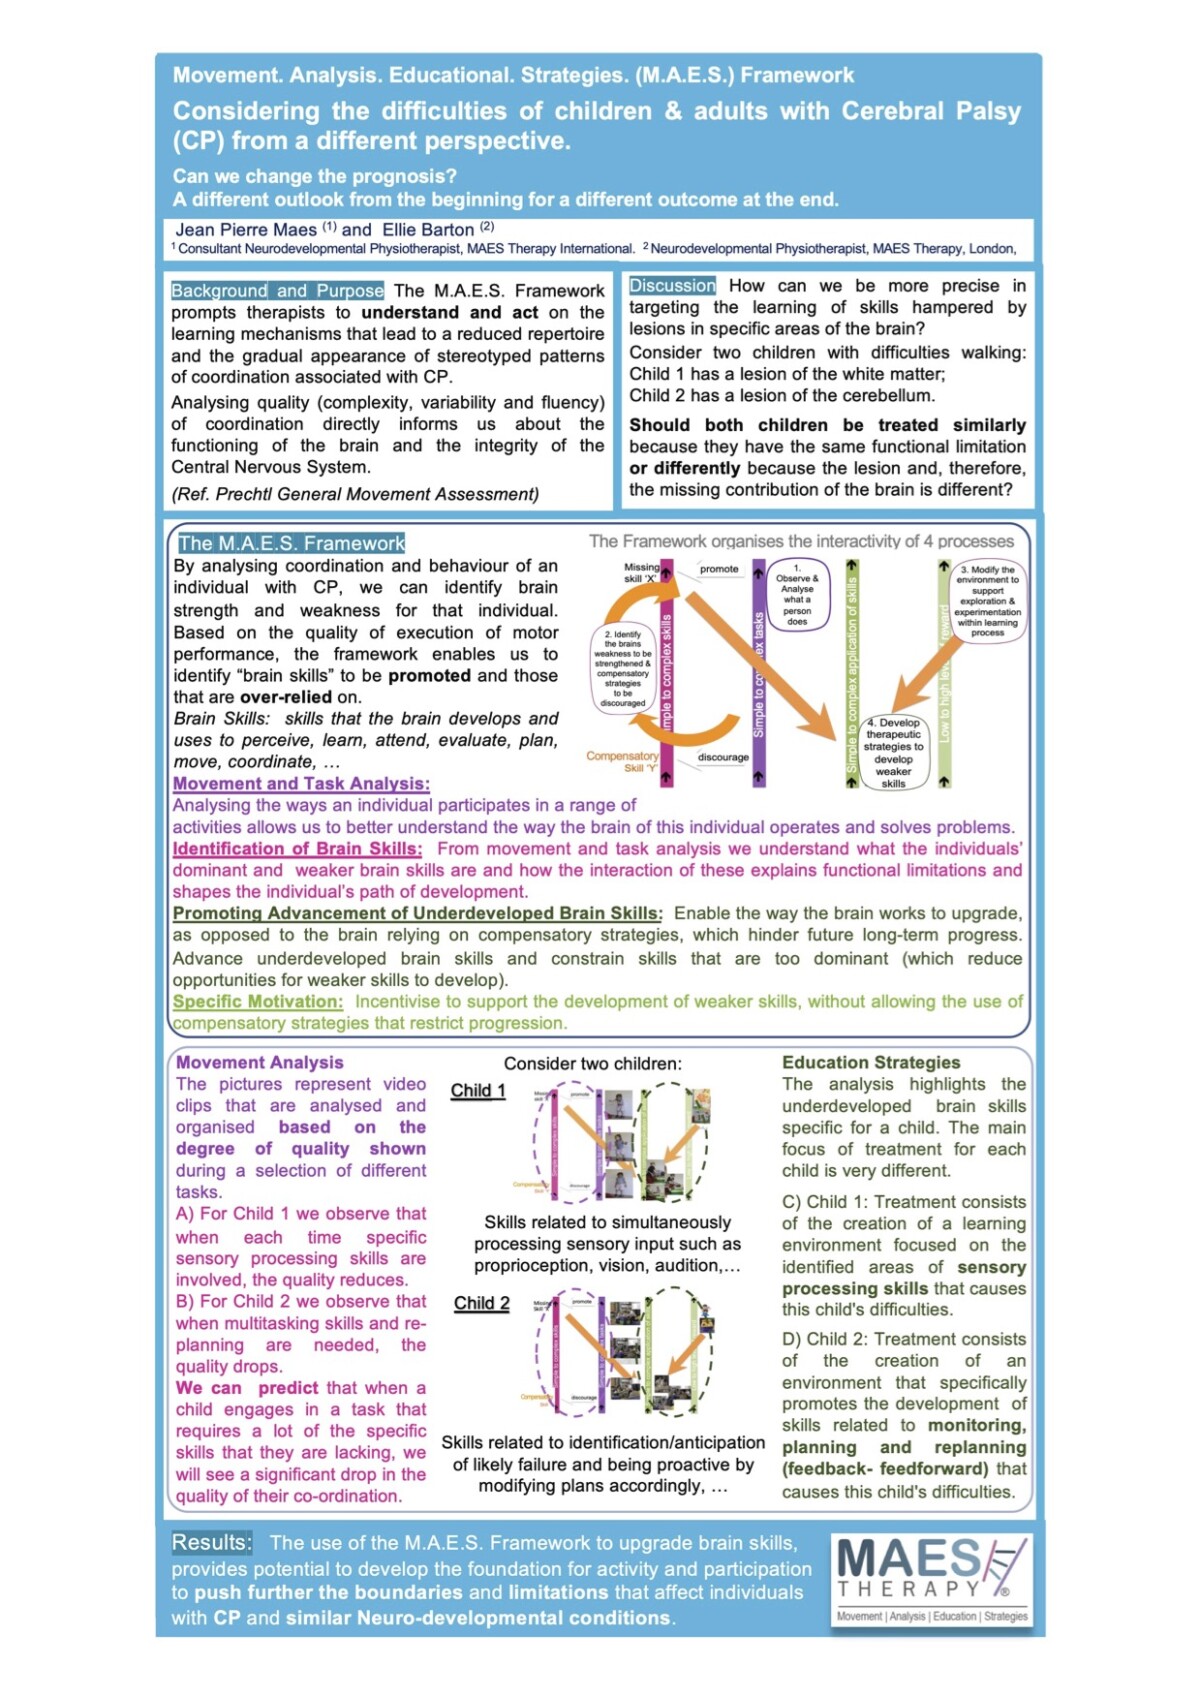 MAES-e-Poster-2020-EACD-Poland-M.A.E.S.-Framework-Considering-the-difficulties-of-children-adults-with-Cerebral-Palsy-CP-from-a-different-perspective.-631KB-1200x1698.jpg